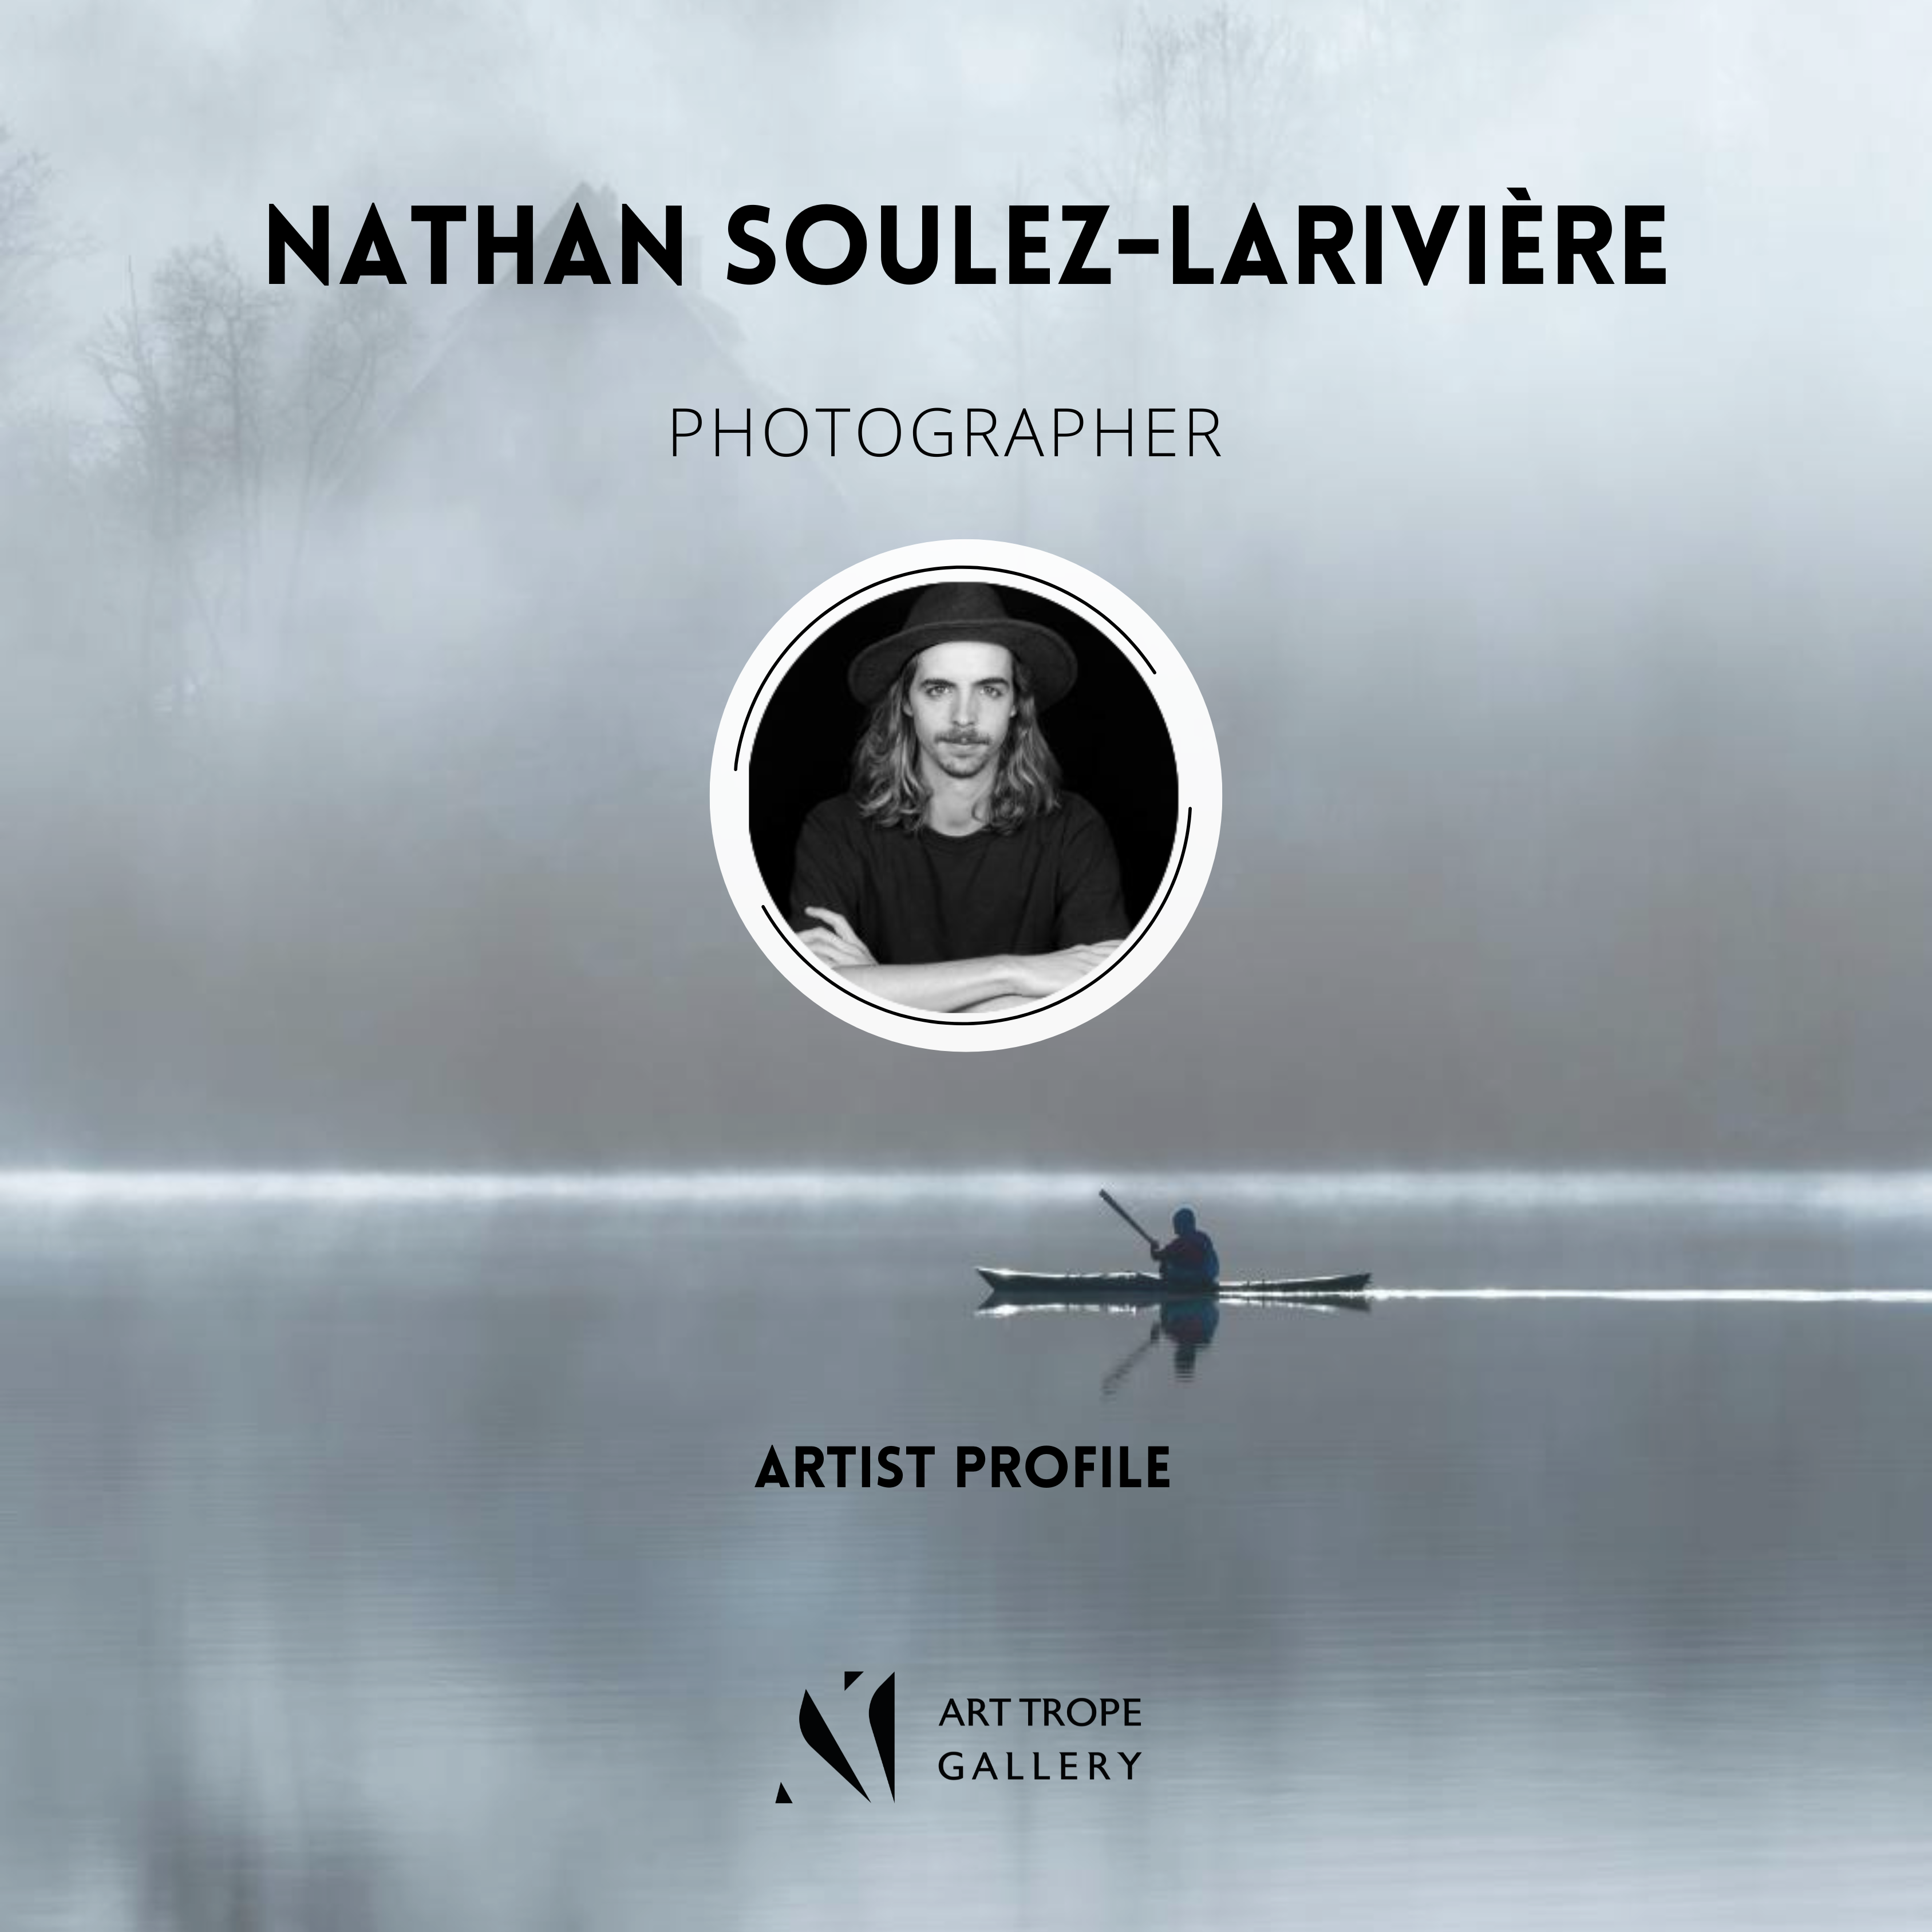 Art Trope Gallery features Photographer Nathan Soulez-Larivière in a dedicated article!